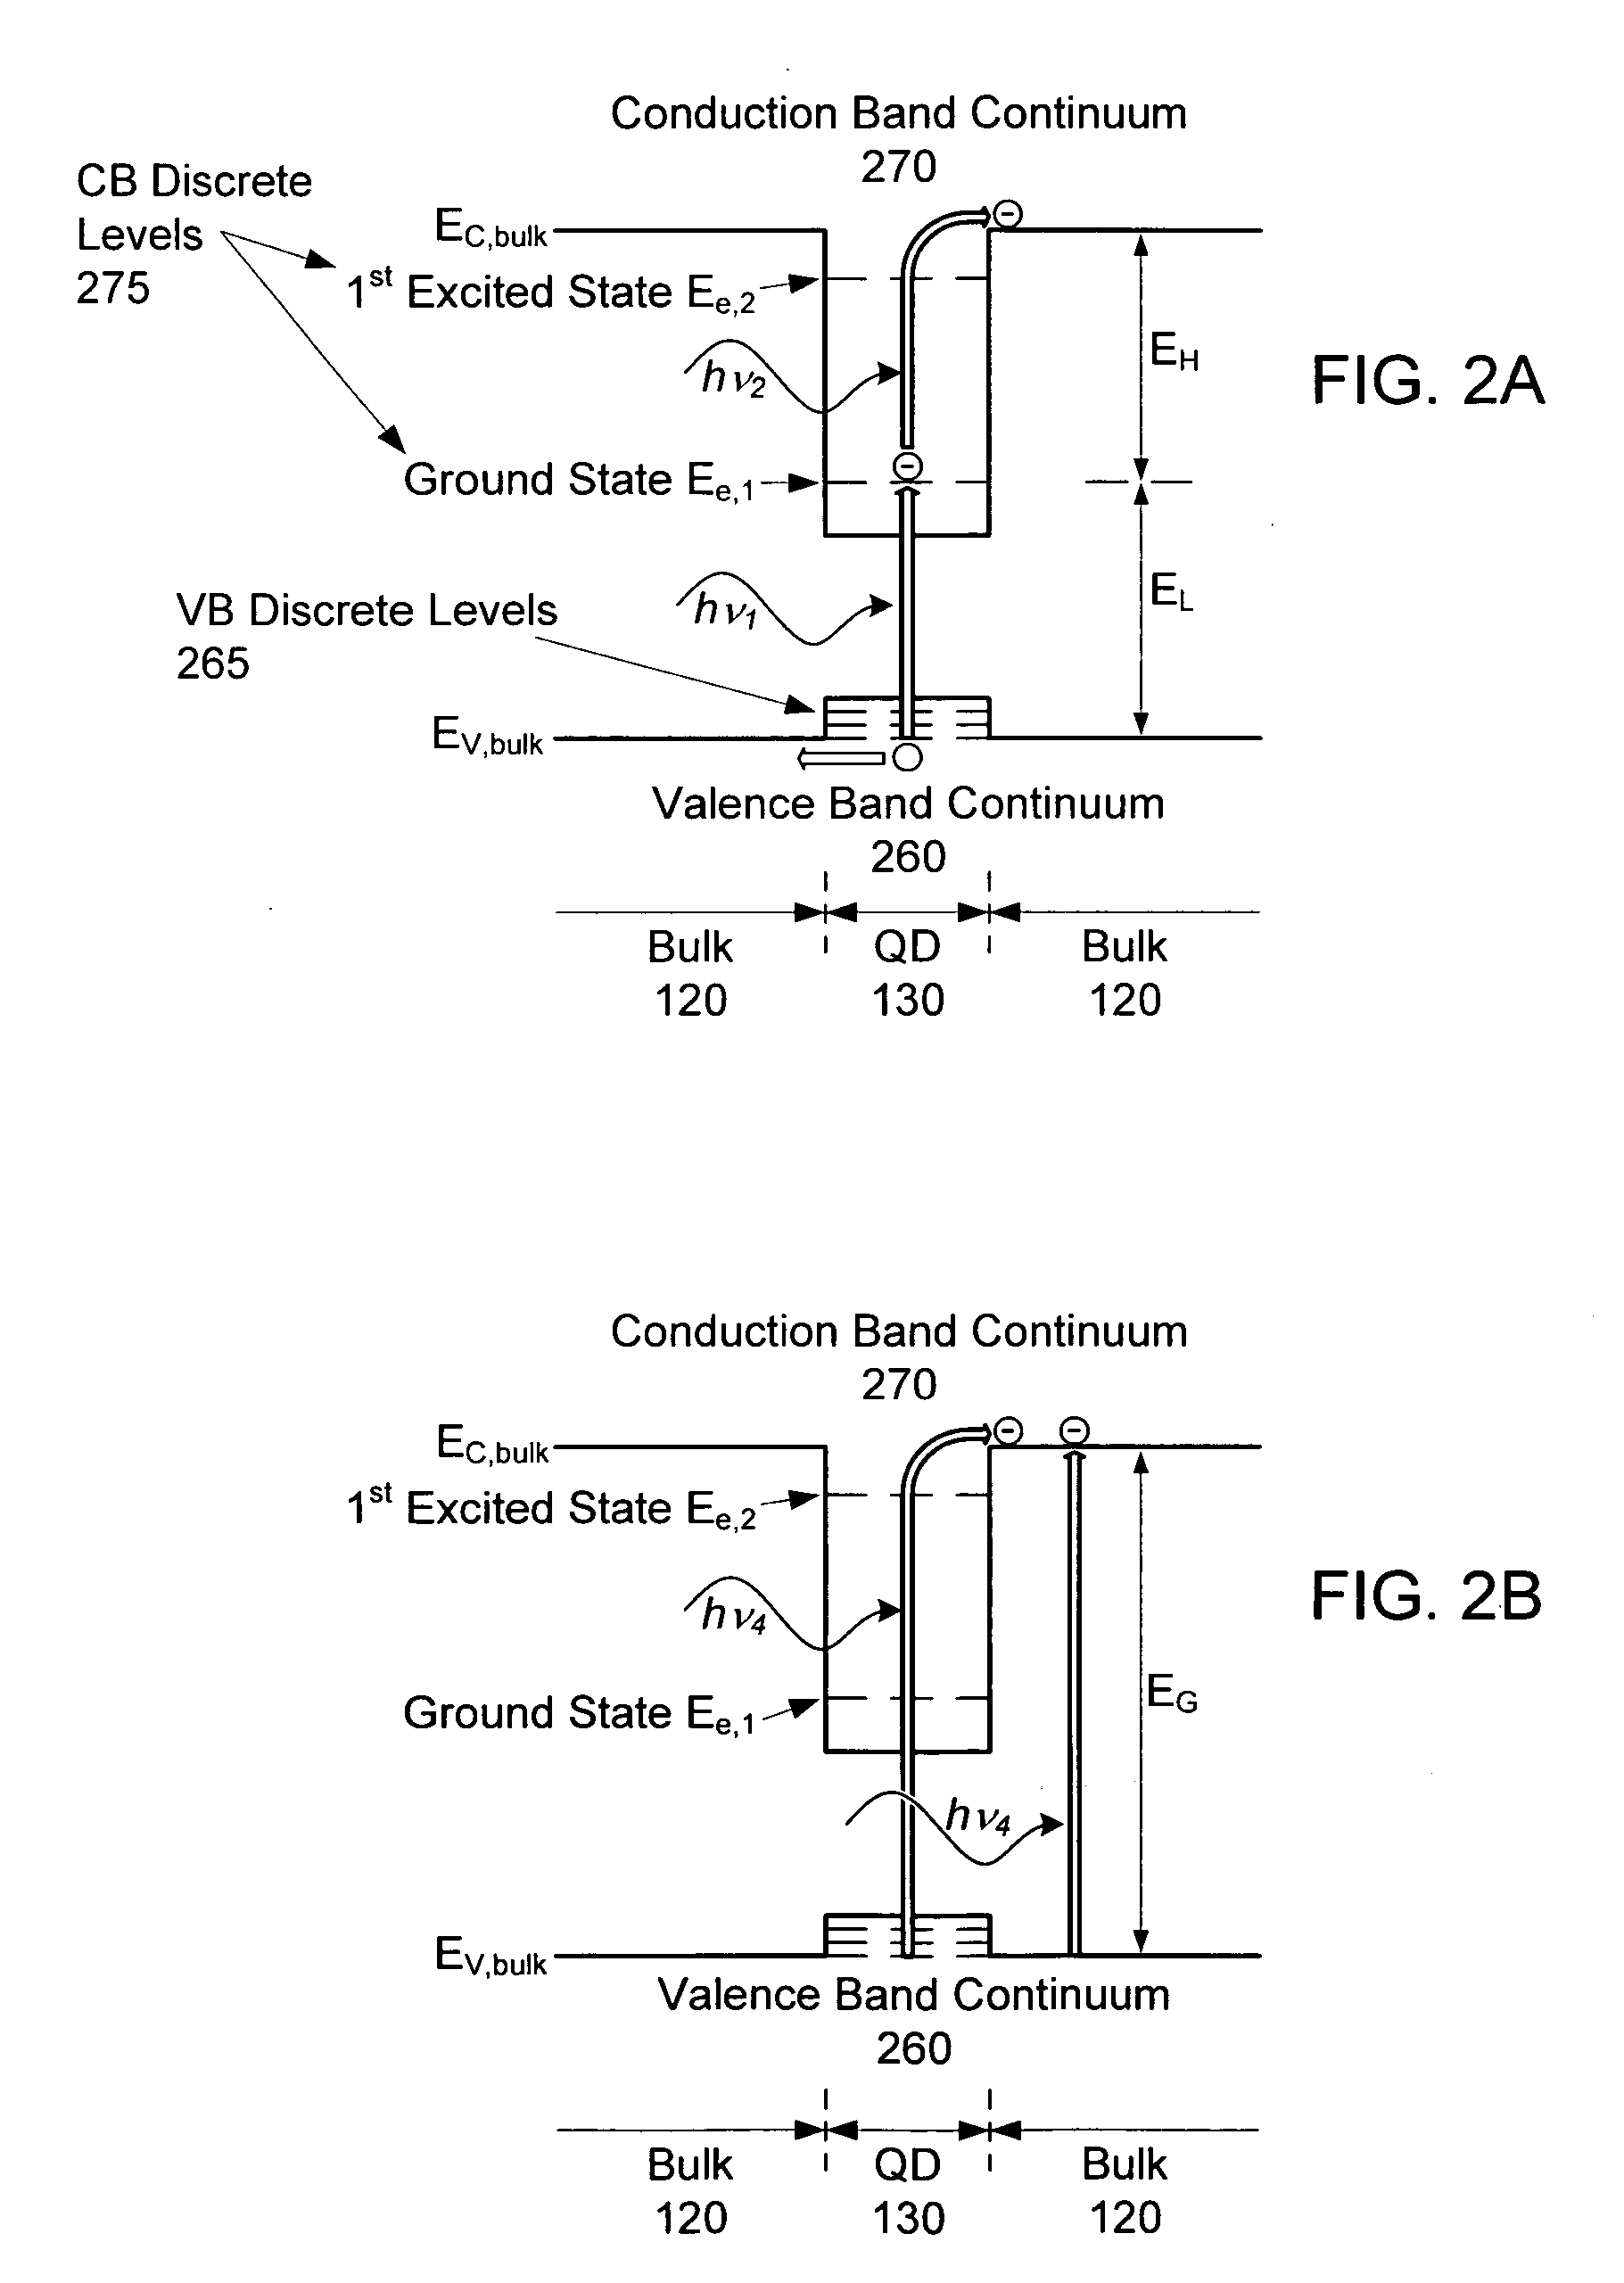 Intermediate-band photosensitive device with quantum dots having tunneling barrier embedded in organic matrix